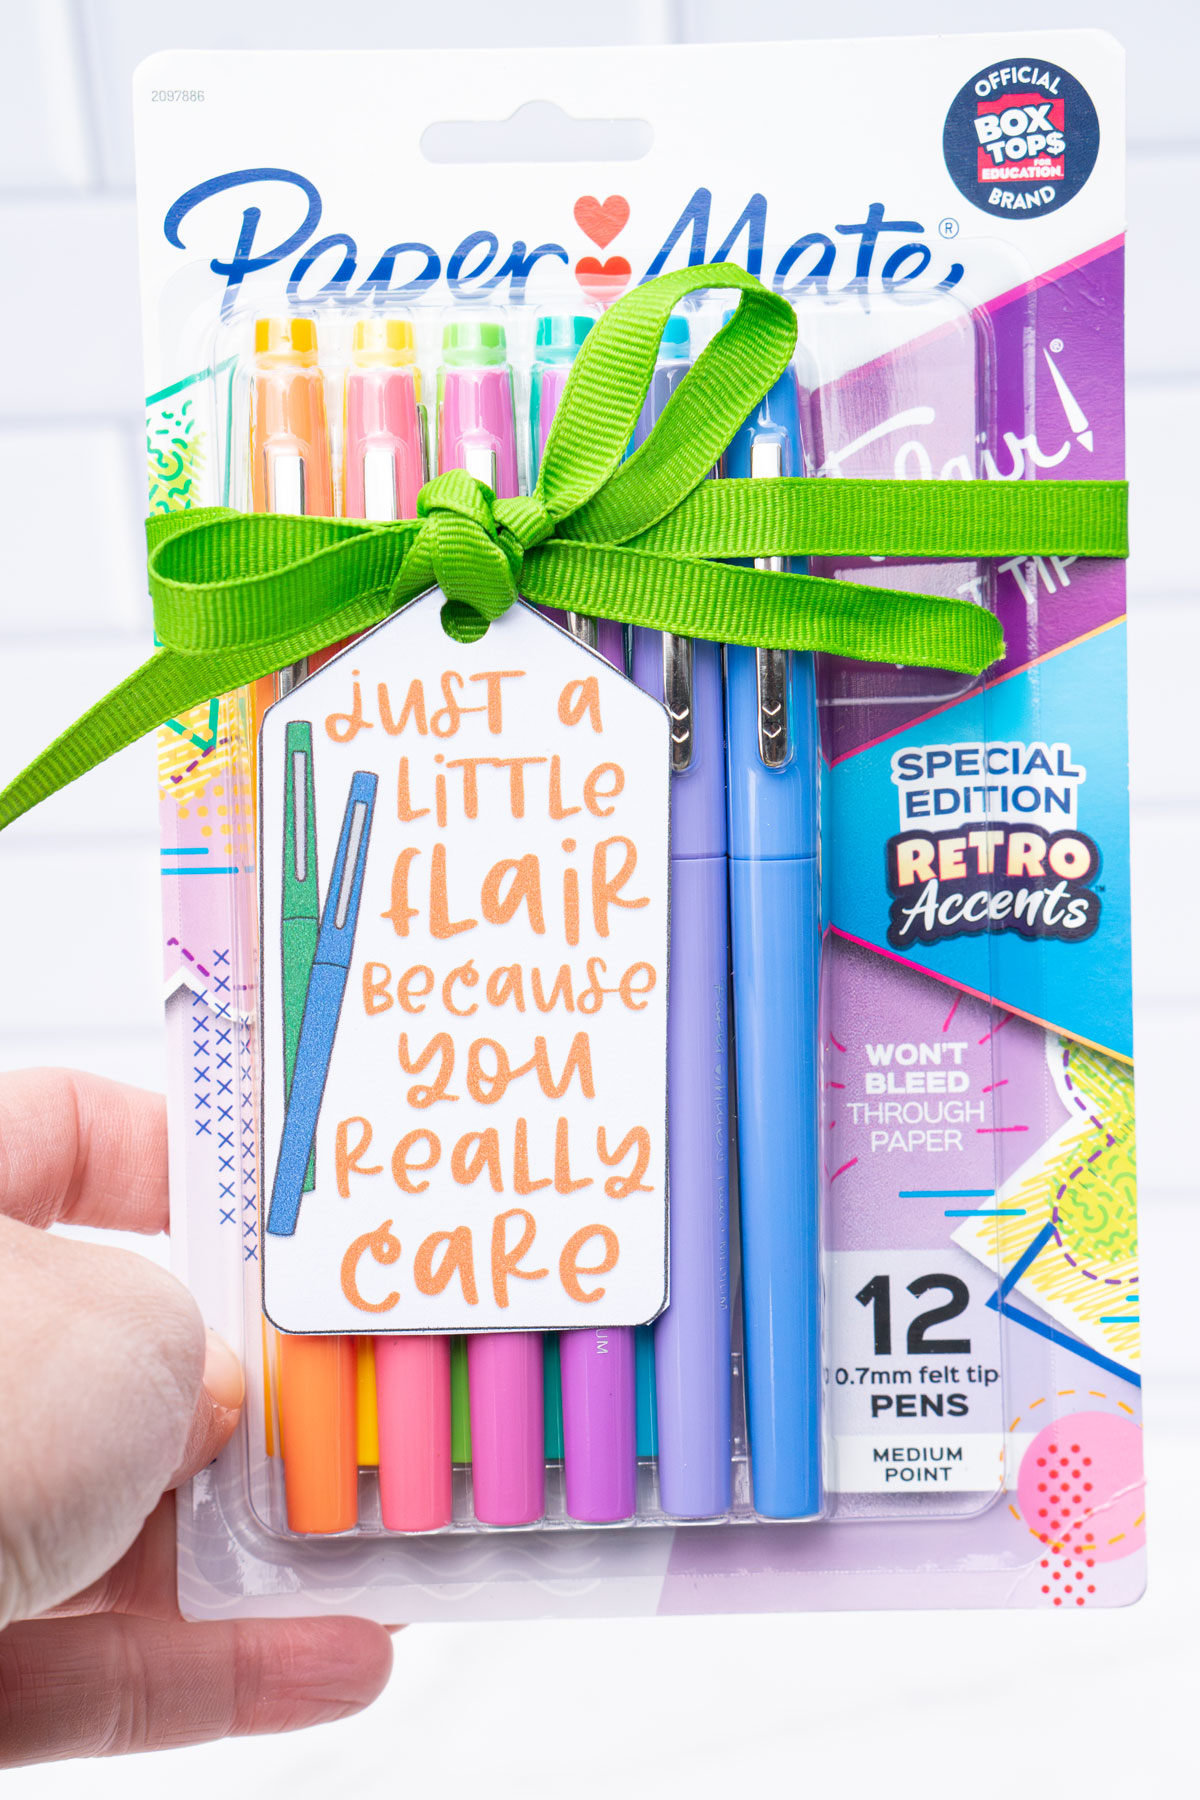 This image is of a pack of Flair pens with a green ribbon and gift tag that says just a little flair because you really care.